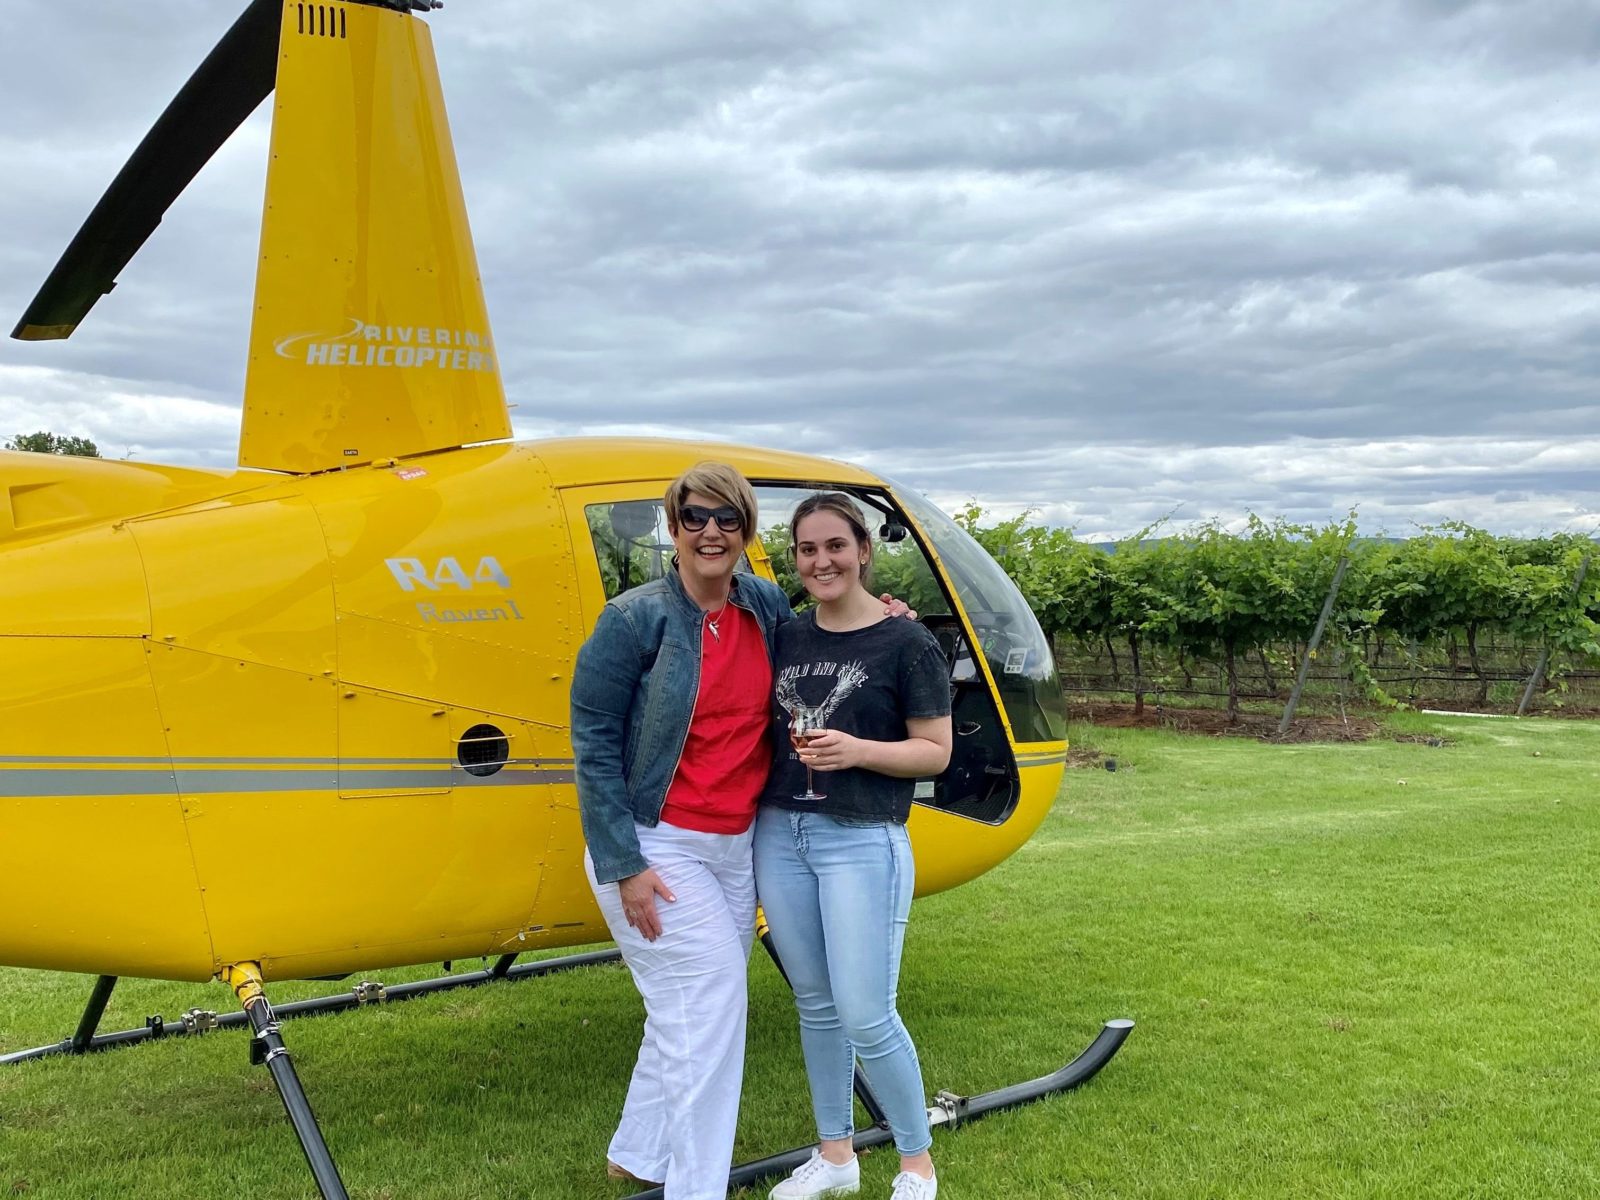 Two lovely ladies enjoying a glass of wine after arriving by helicopter in fron of a vineyard